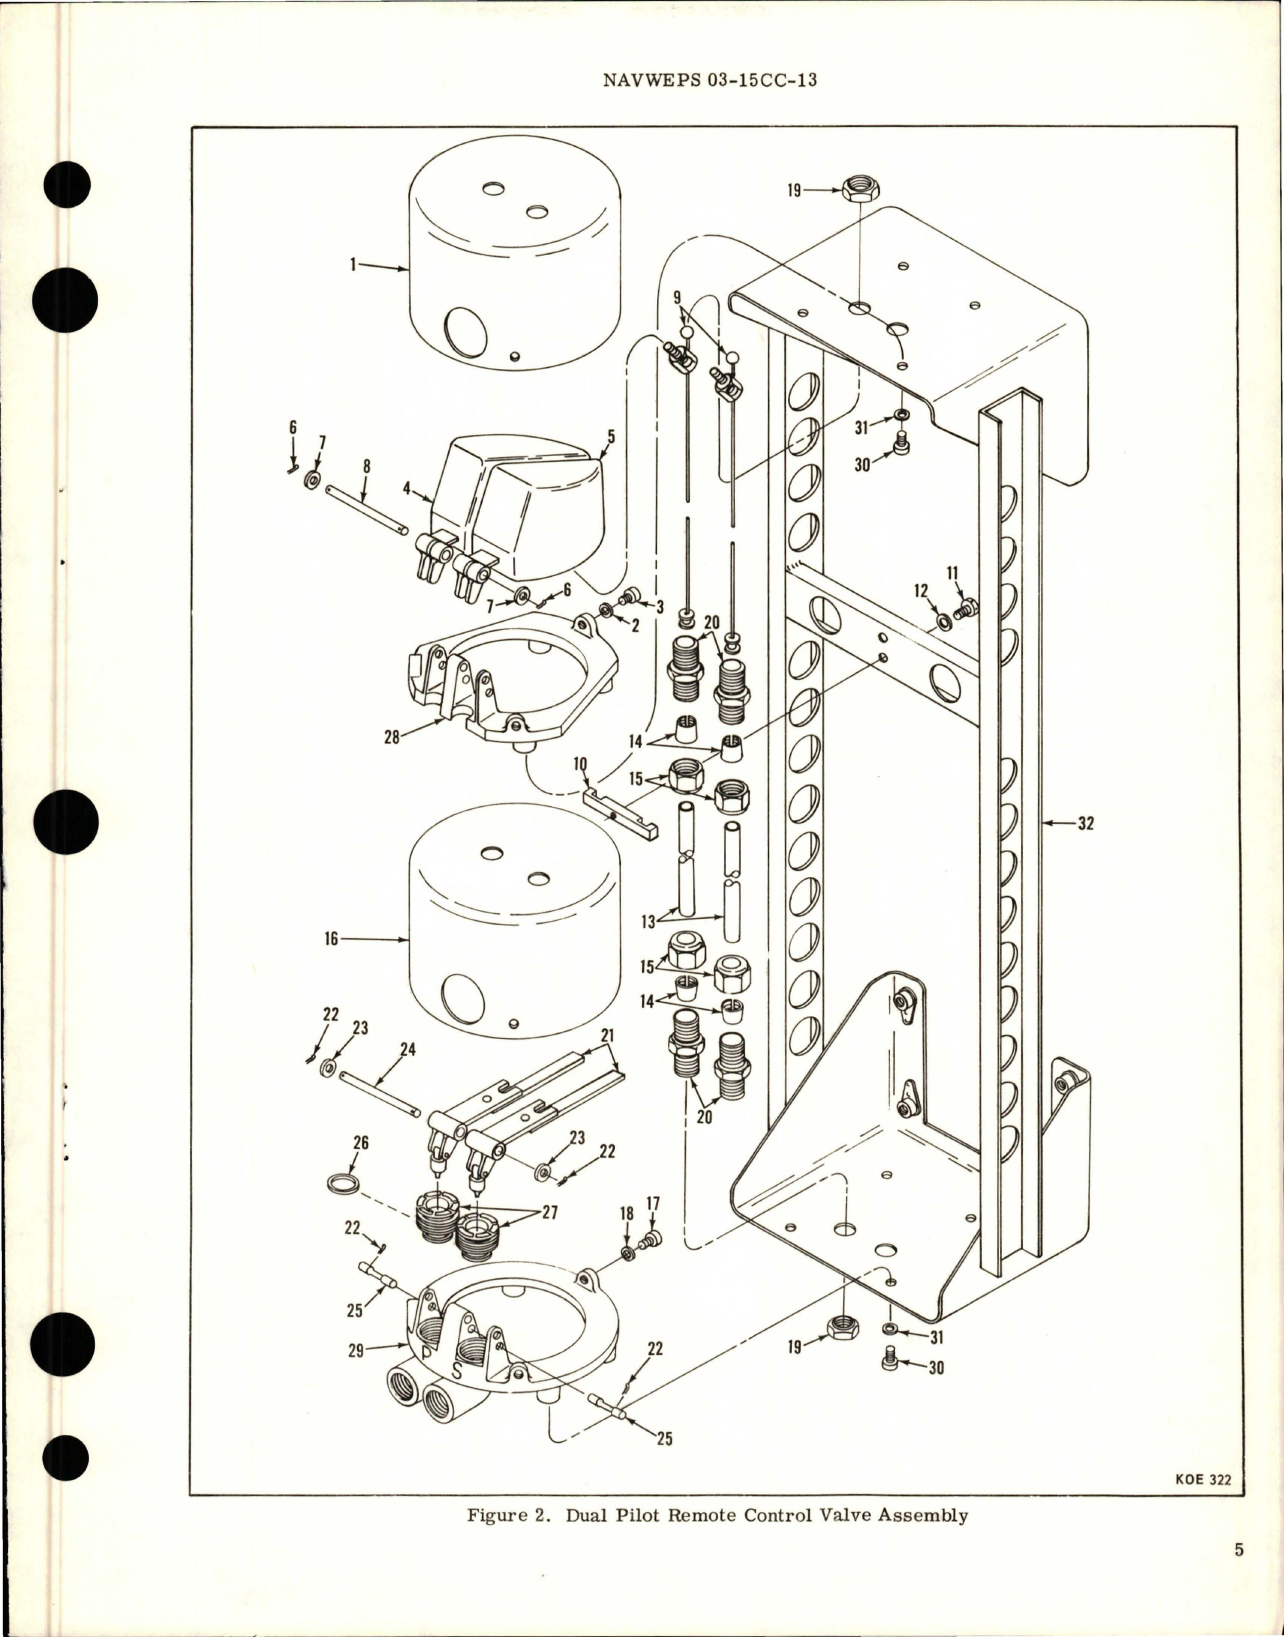 Sample page 5 from AirCorps Library document: Overhaul Instructions with Parts for Dual Pilot Remote Control Valve - Parts 7-115115 and 7-115115-1